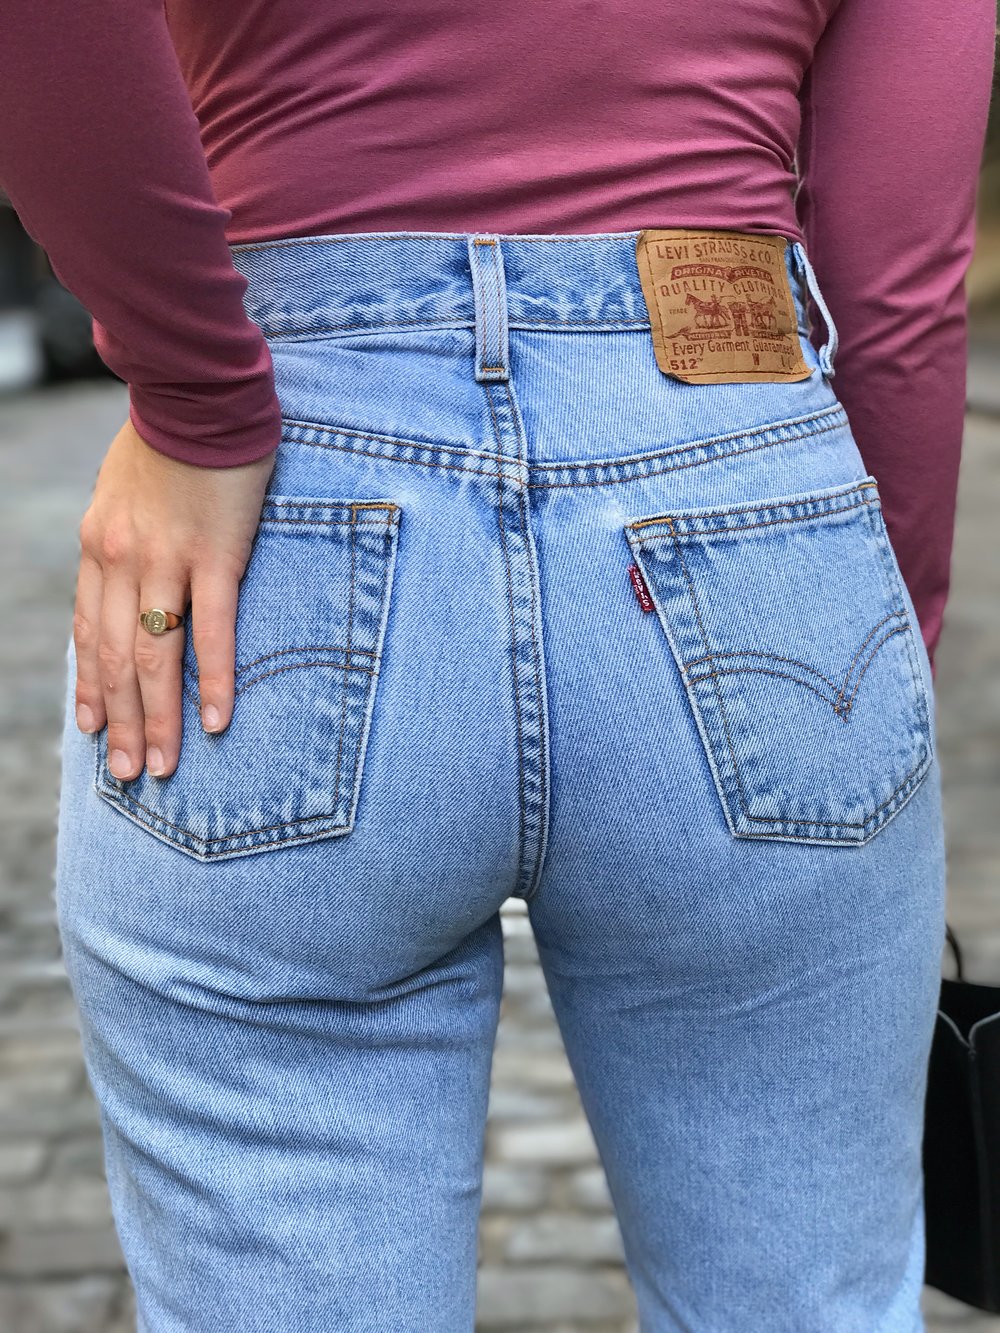 levi's jeans — short & curvy girl seeking clothes that fit — The Petite  Pear Project